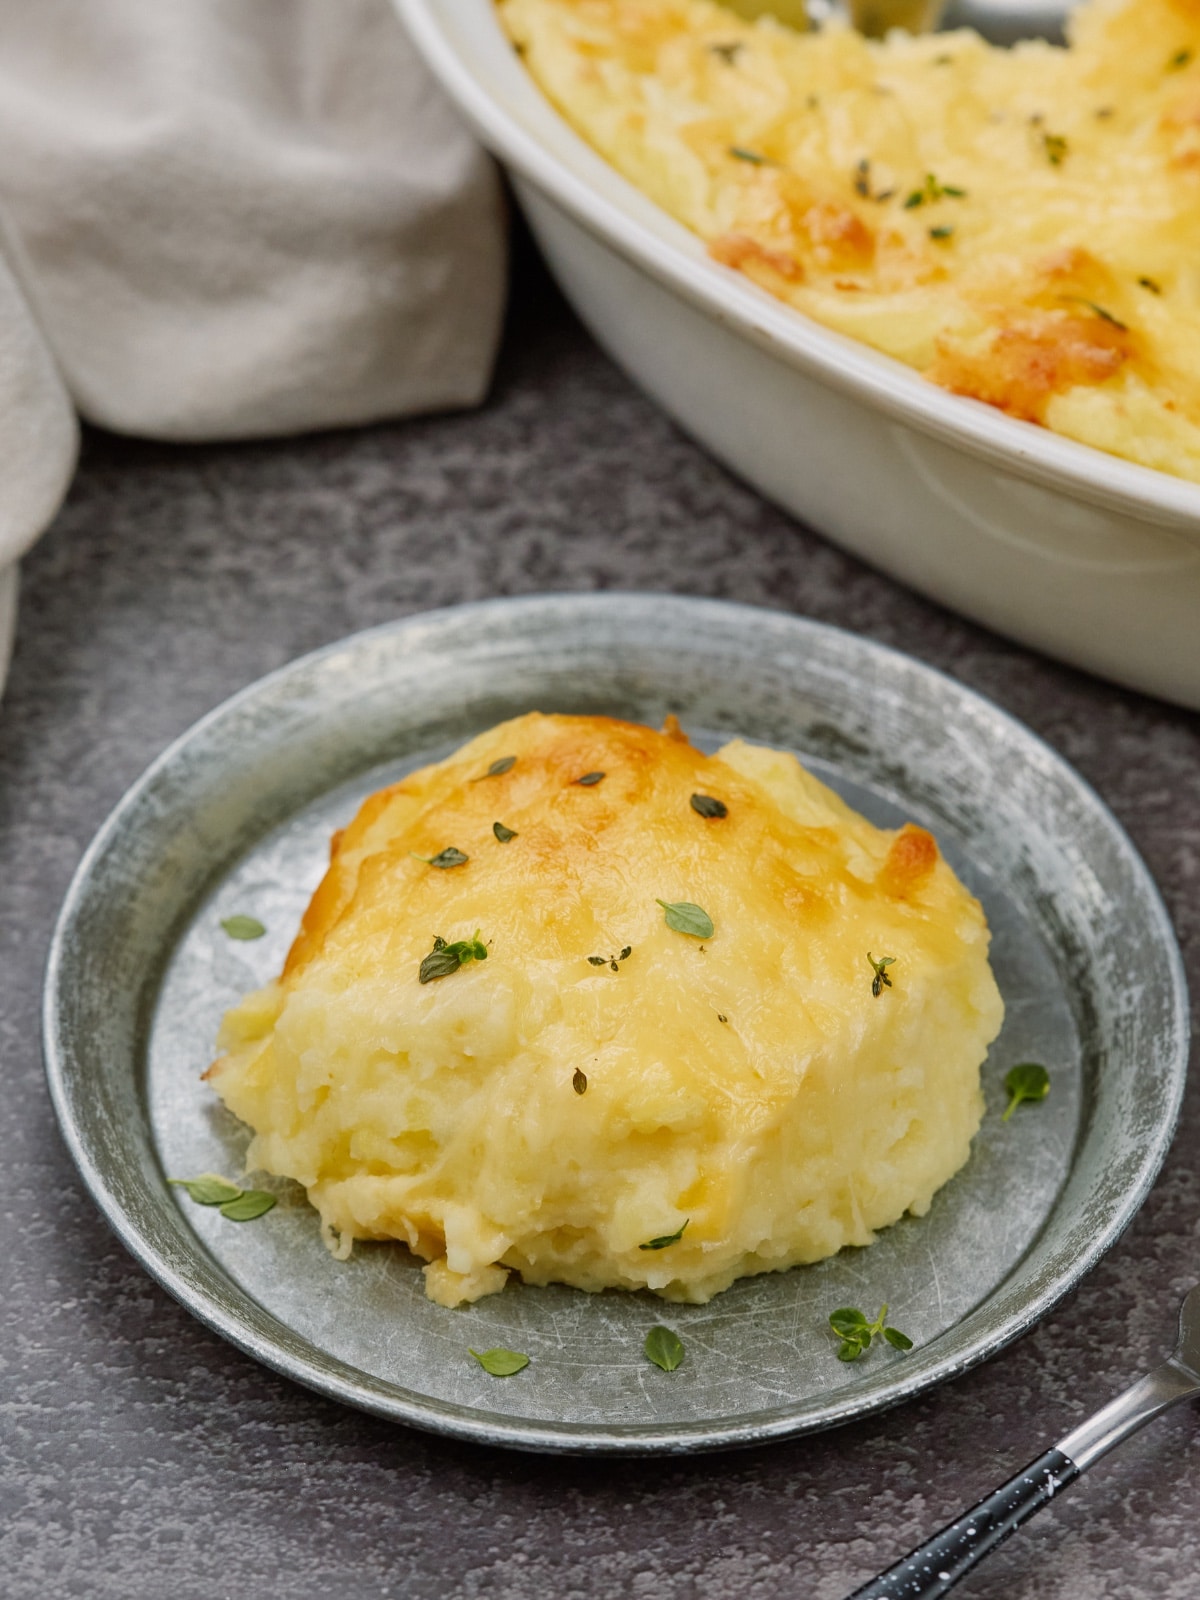 a serving of mashed potato casserole on a plate